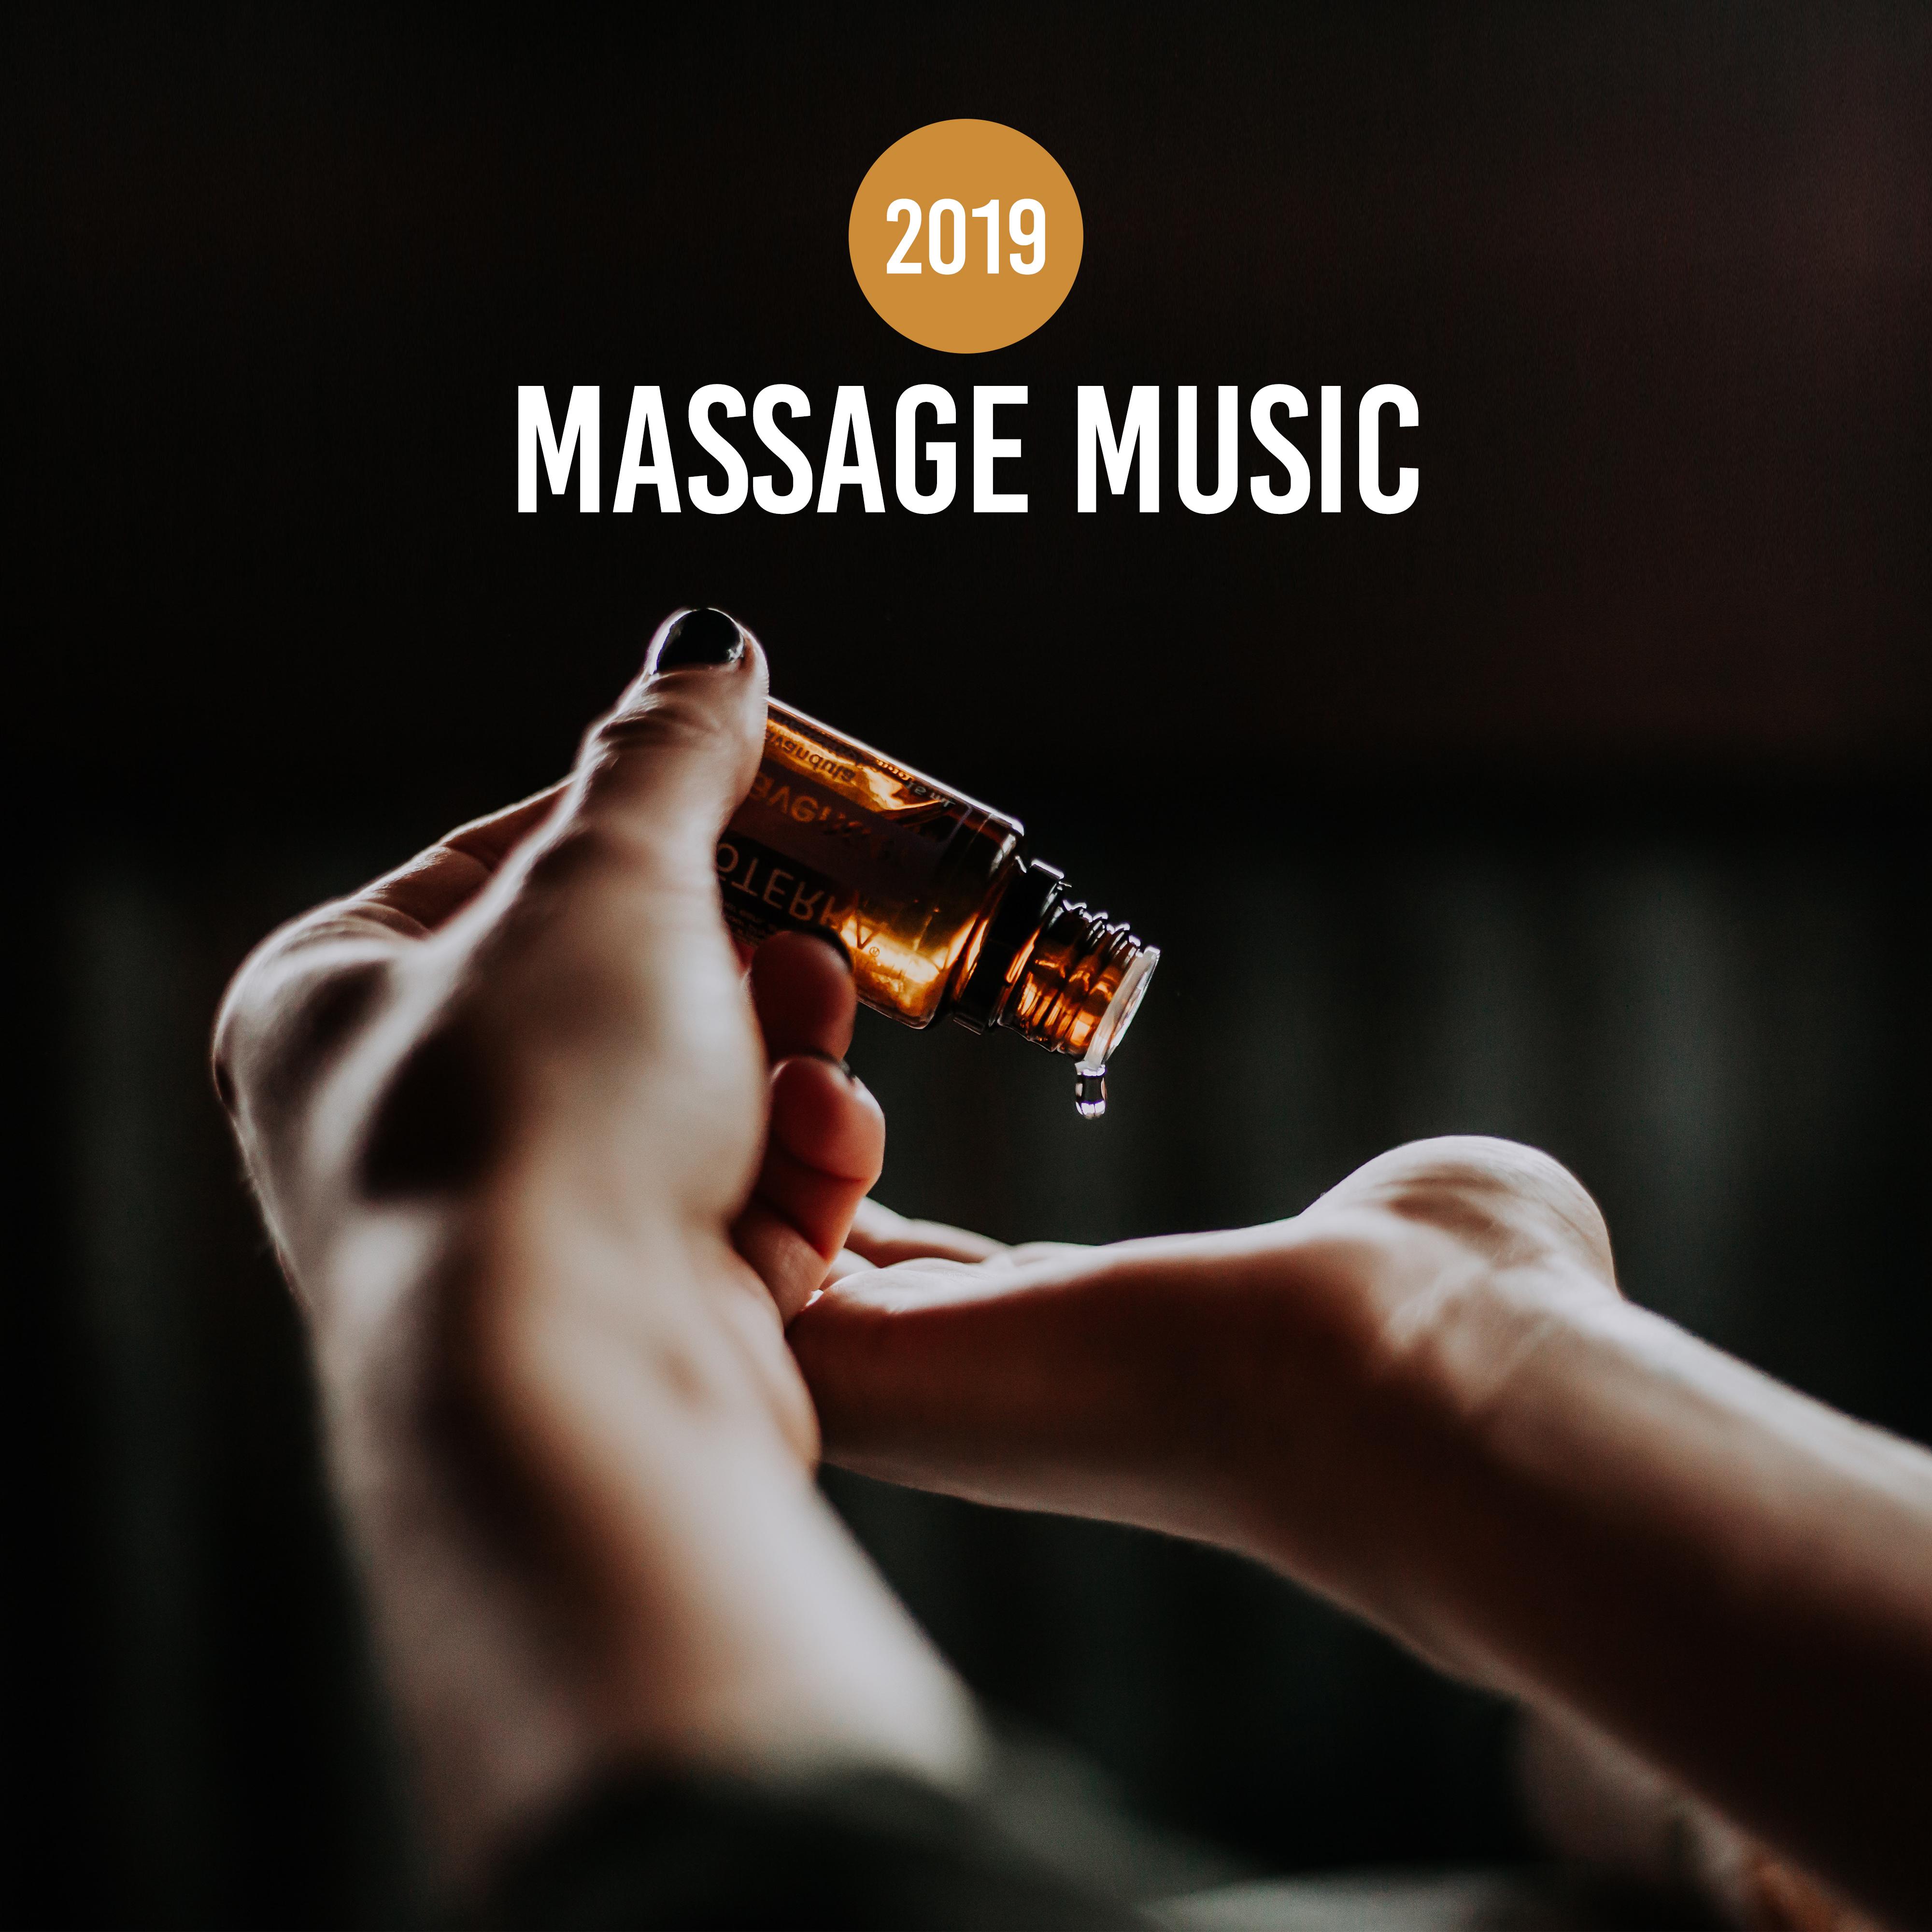 2019 Massage Music – Relaxing Music Therapy, Deep Harmony, Calming Sounds for Spa & Wellness, Stress Relief, Sleep Songs, Relax & Rest, Lounge